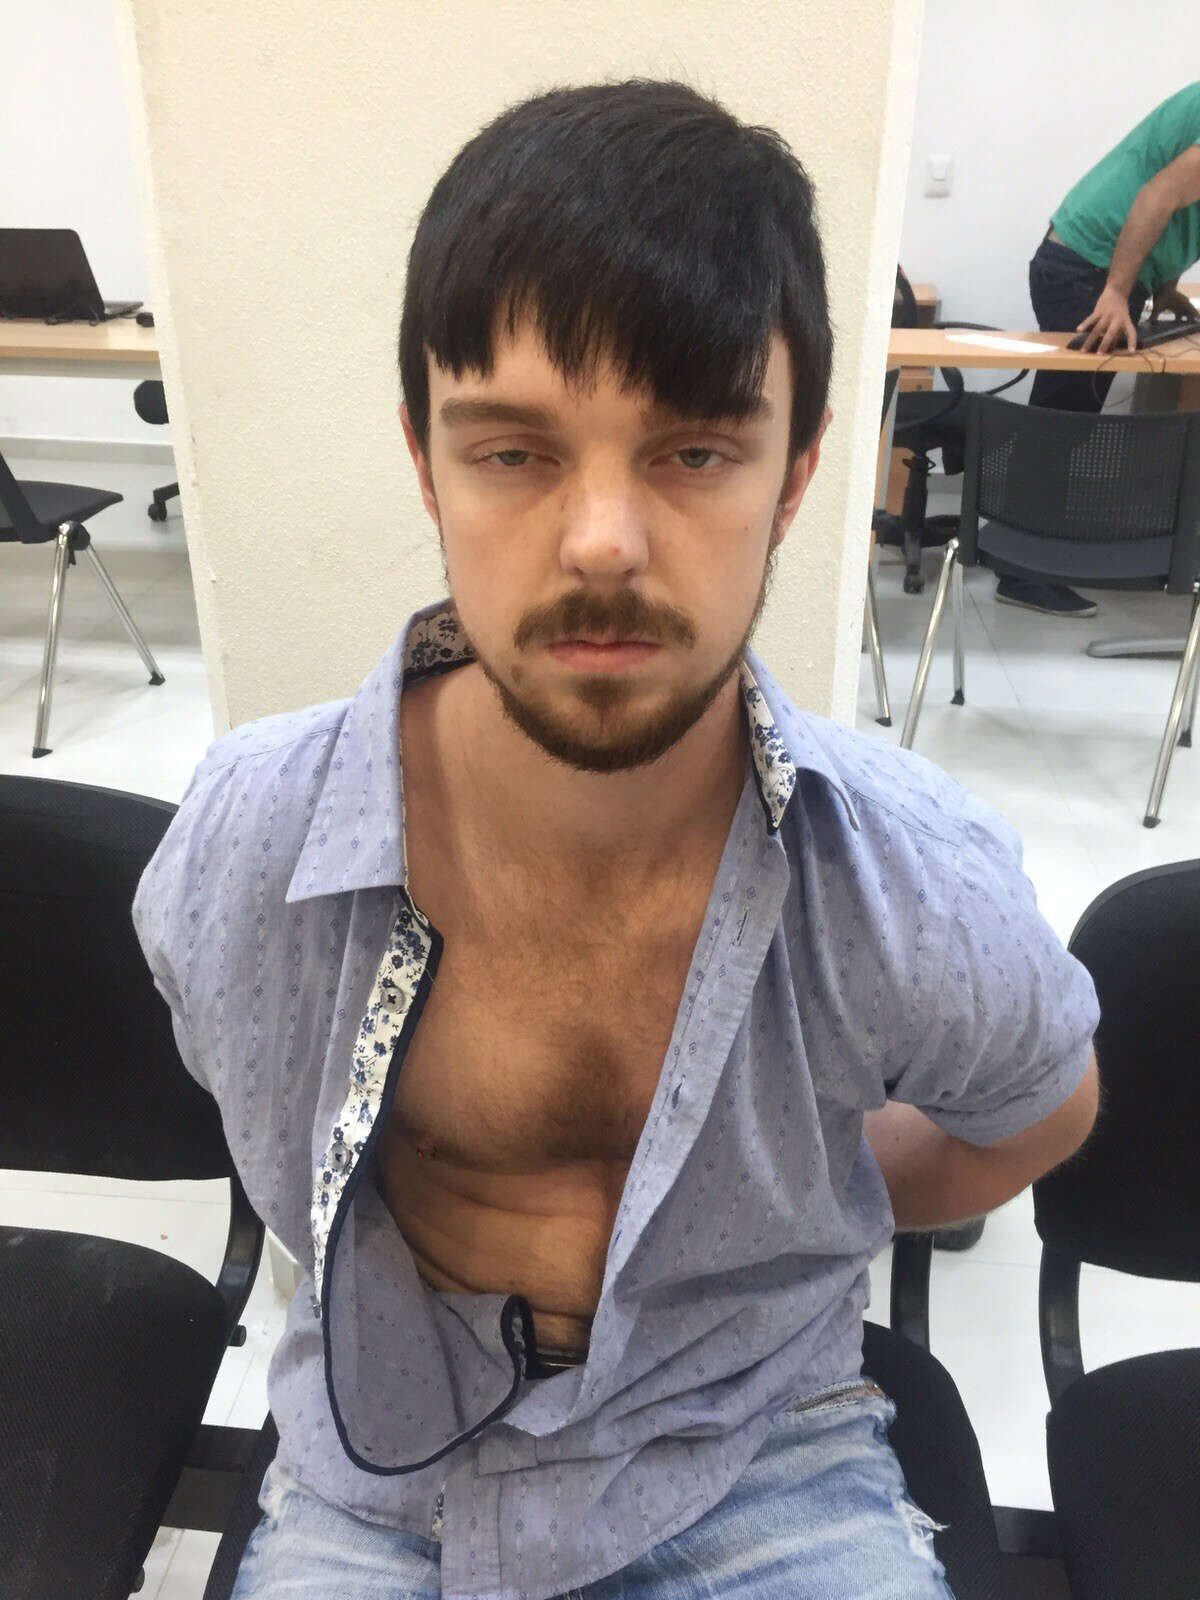 Ethan Couch is seen on Dec. 28, 2015, after he was taken into custody in Puerto Vallarta, Mexico. The Mexican lawyer for the Texas teenager known for using an "affluenza" defense in a fatal drunken-driving accident said Monday, Jan. 4, 2016 that his appeal against deportation could delay his client's return to the United States for weeks, perhaps months.